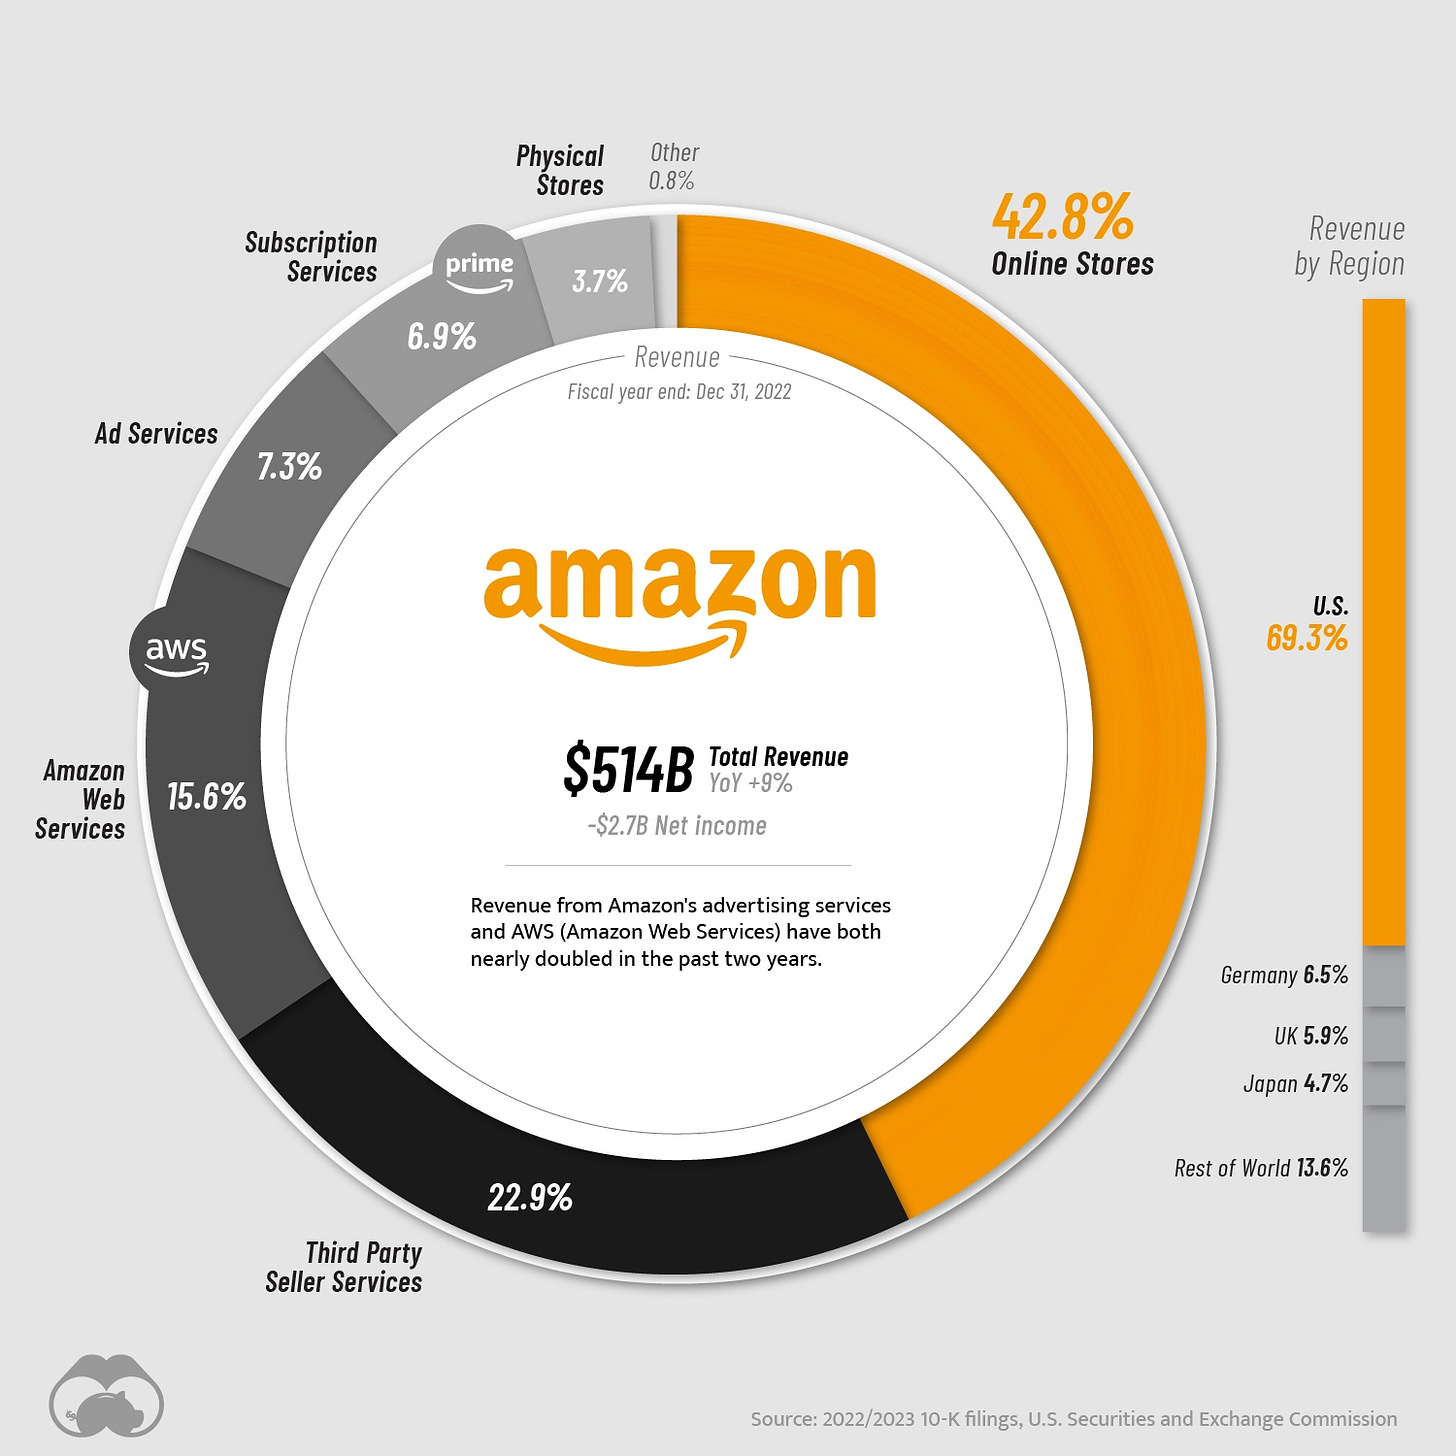 May be a graphic of text that says 'Physical Stores Other 0.8% Subscription Ser vices prime 3.7% 6.9% Ad Services 42.8% Online Stores Revenue Fiscaly d:Dec31 2022 Revenue by Region 7.3% aws Amazon amazon 15.6% Services U.S. 69. 69.3% $514B Y+9% Total Revenue -$2.7B Net income Revenue from mazon's dvertisingservices tising and (Amazo have both nearly doubled the years. ast Germany 6.5% 22.9% K5.9% Japan 4.7% Third Party Seller Services Rest World 13.6% Û'